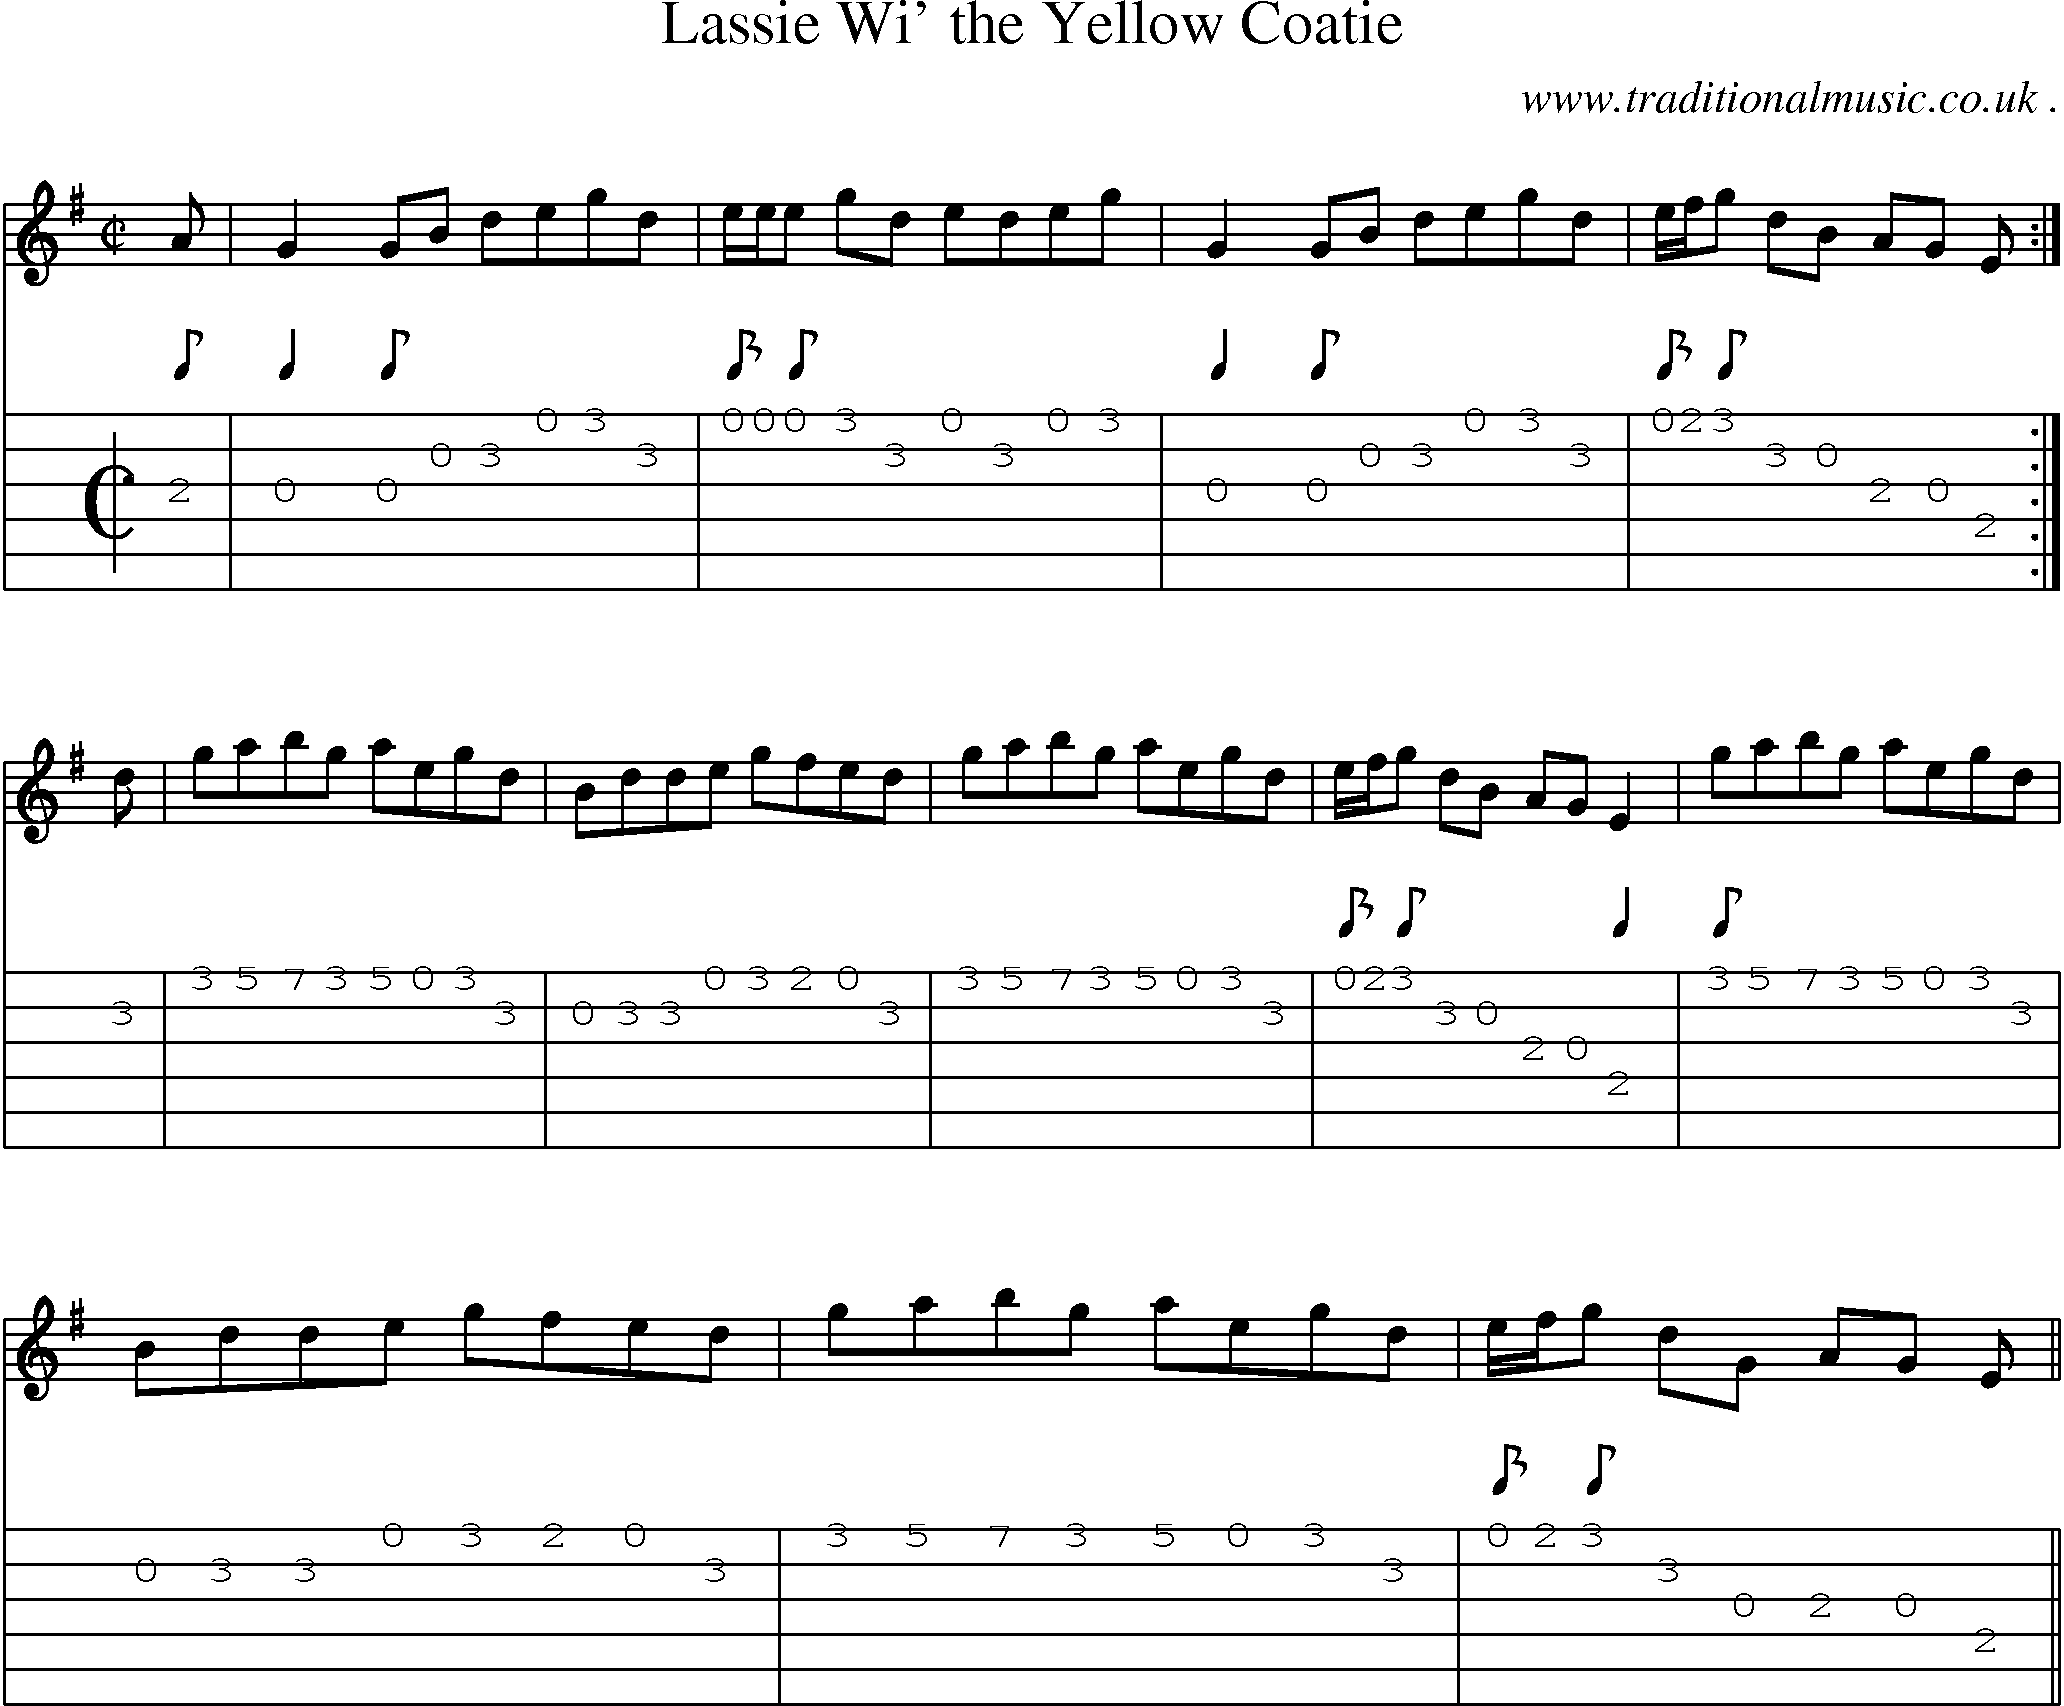 Sheet-music  score, Chords and Guitar Tabs for Lassie Wi The Yellow Coatie